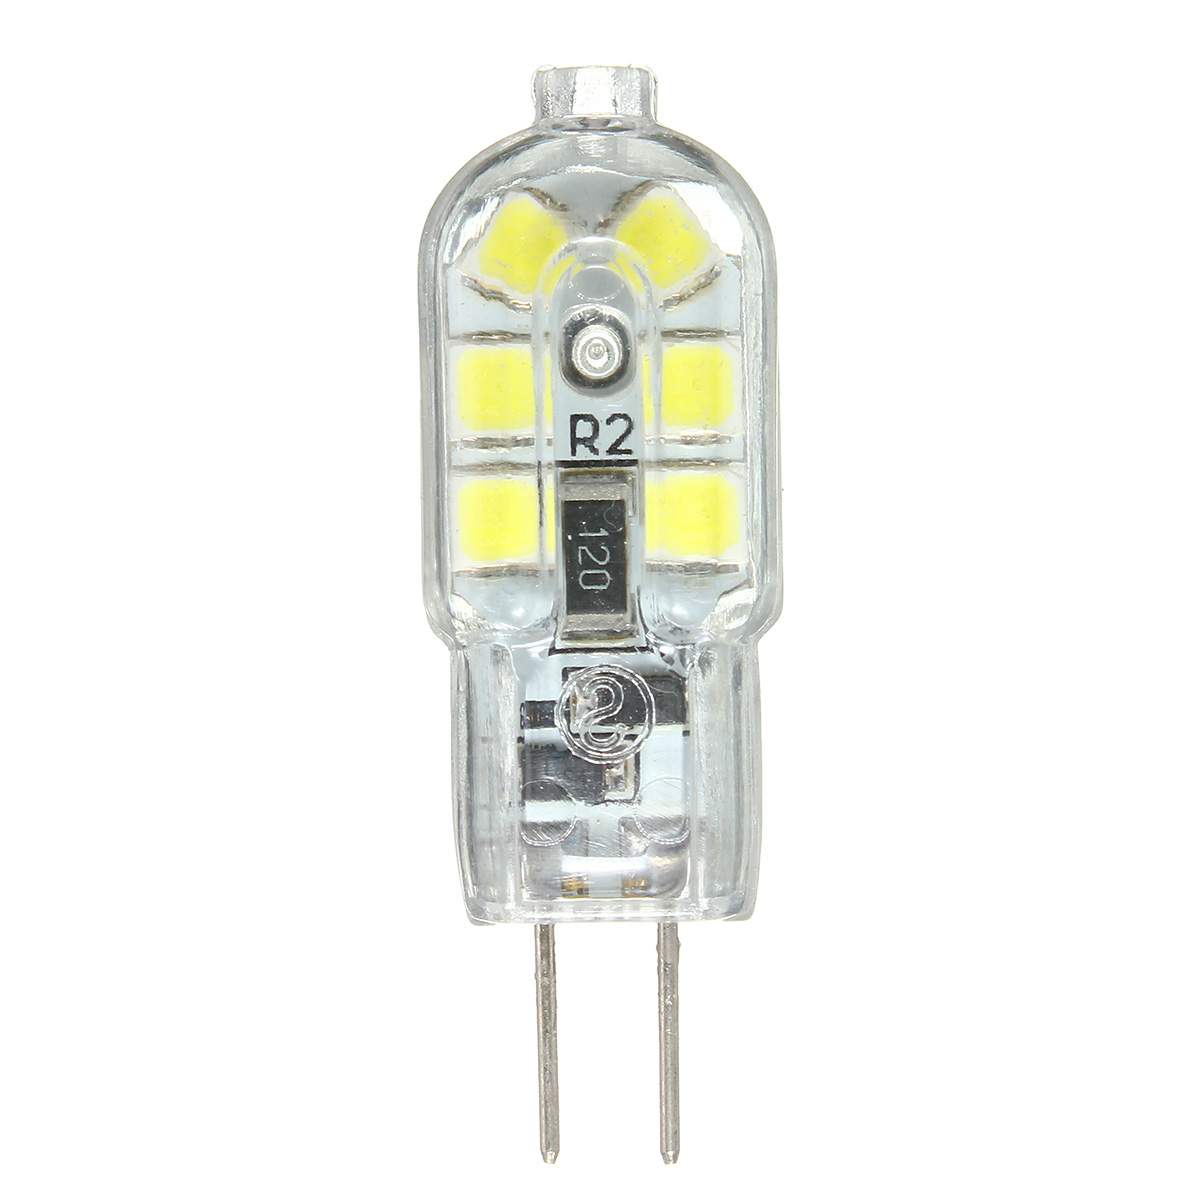 

5PCS DC12V G4 2W 2835 Non-dimmable Transparent Cool White 12 LED Light Bulb for Pendant Indoor Use